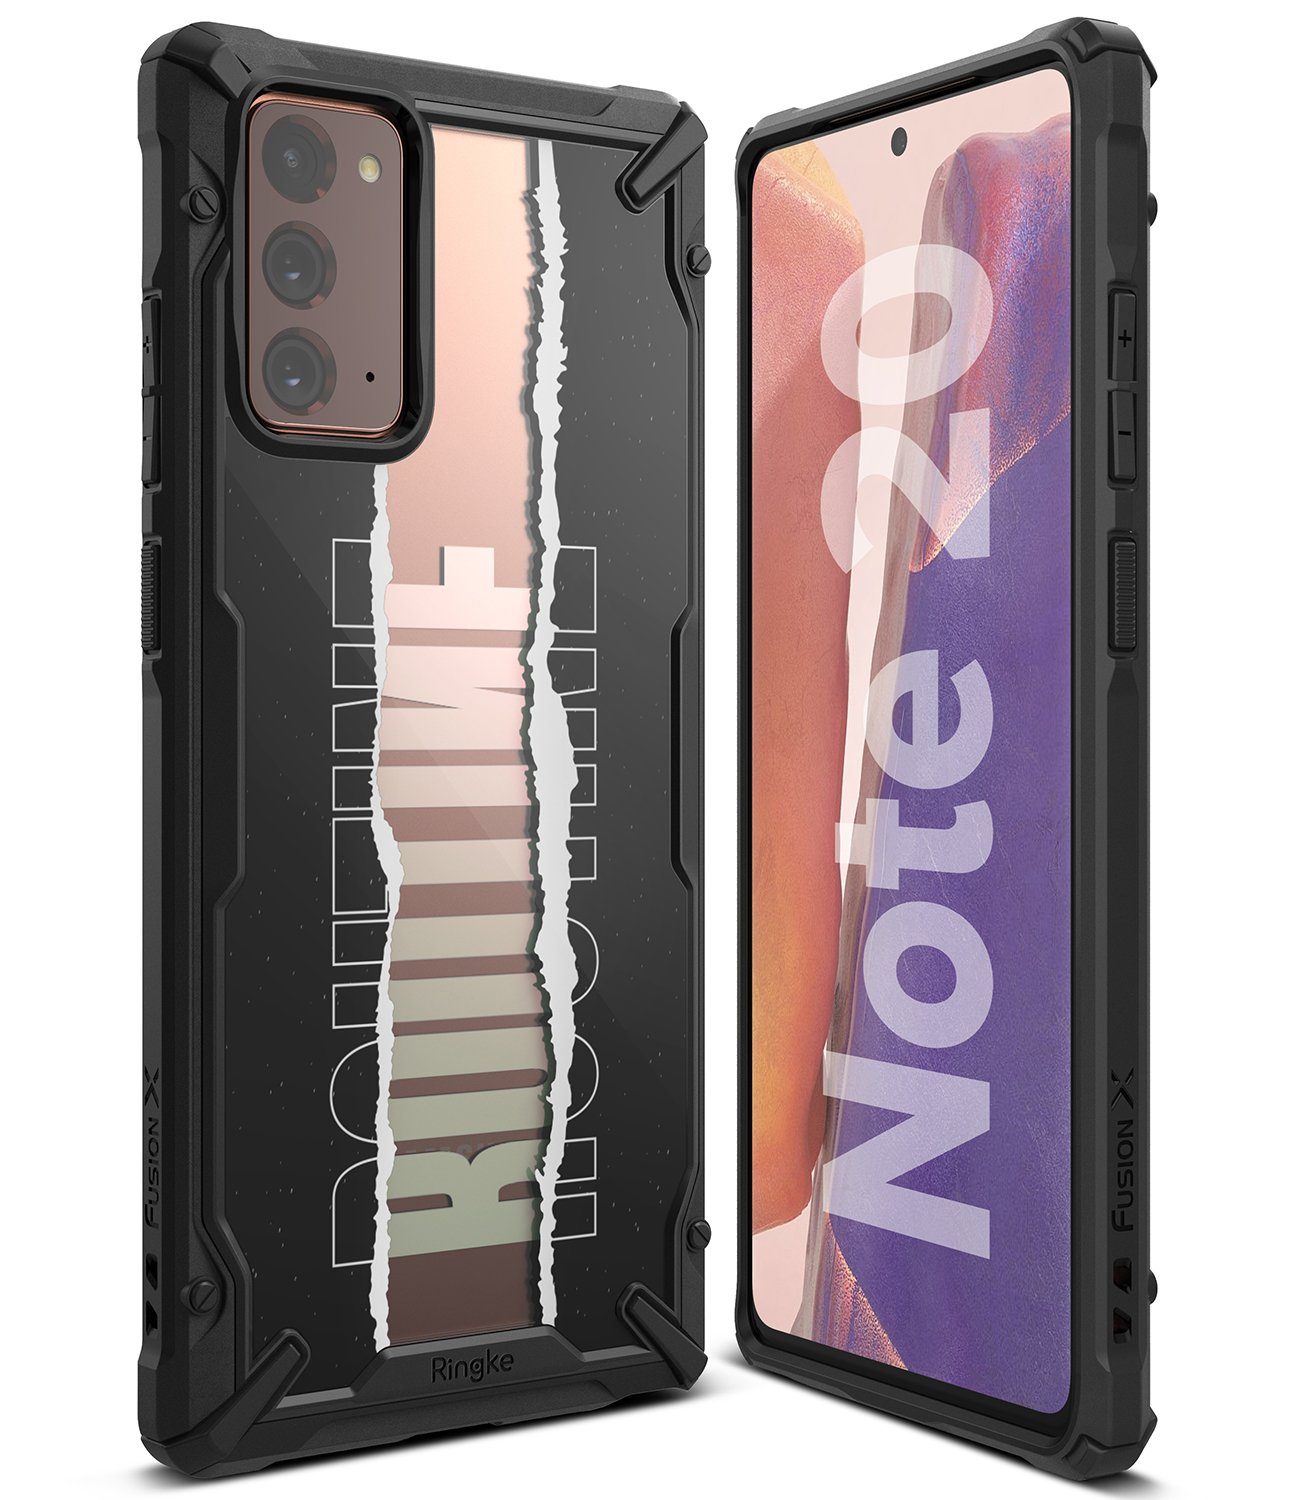 Ringke Fusion X Design Case for Samsung Galaxy Note 20, Rountine Default Ringke 